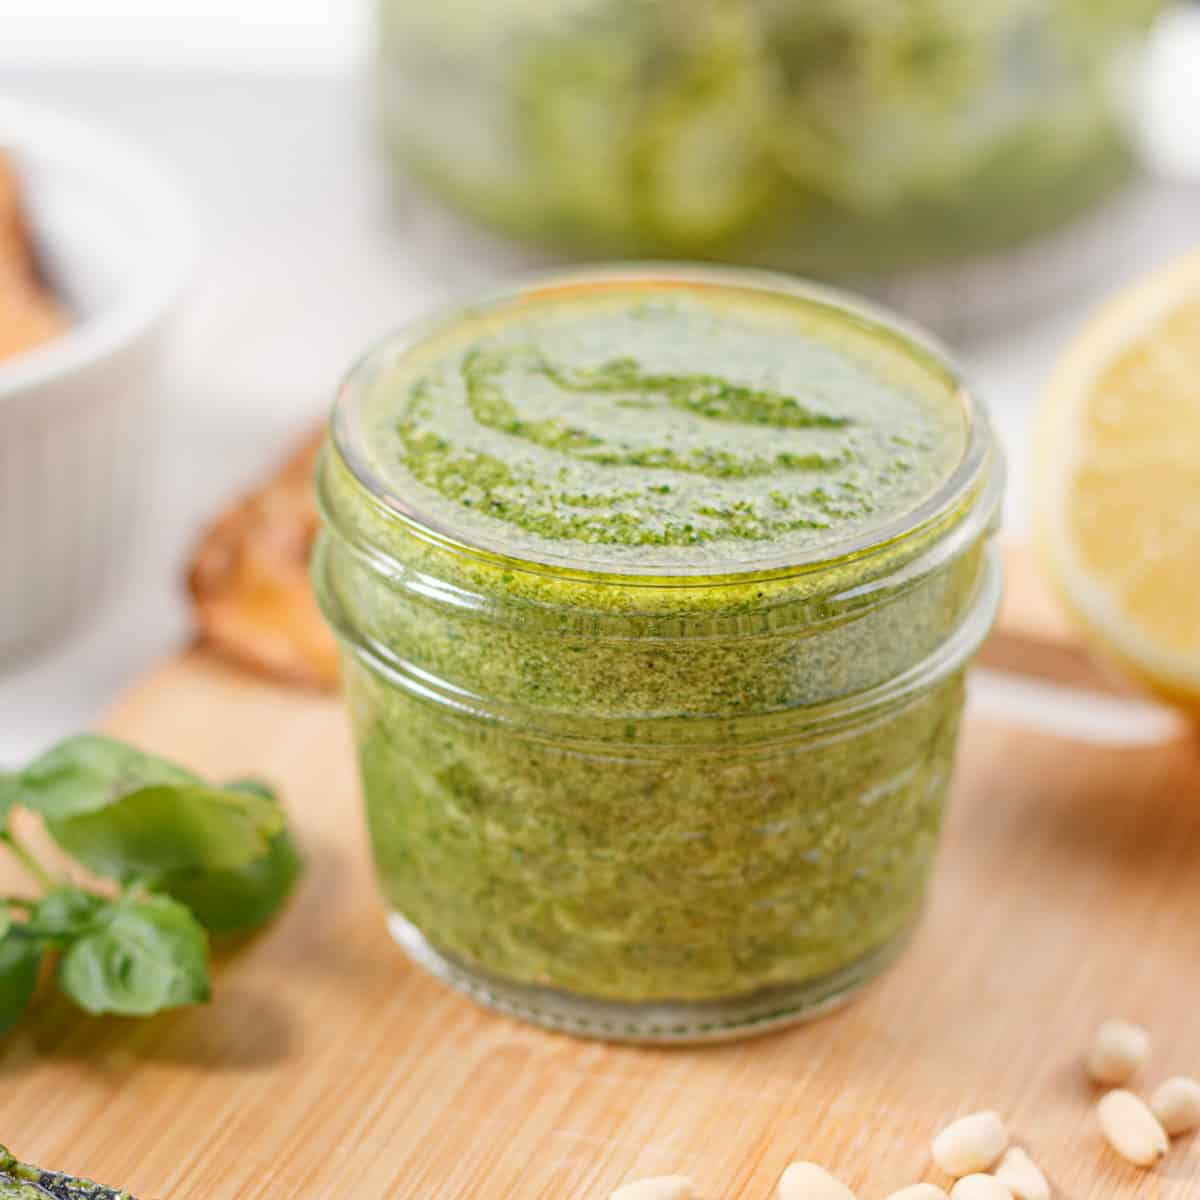 Low-sodium pesto in a glass jar on a wooden cutting board.